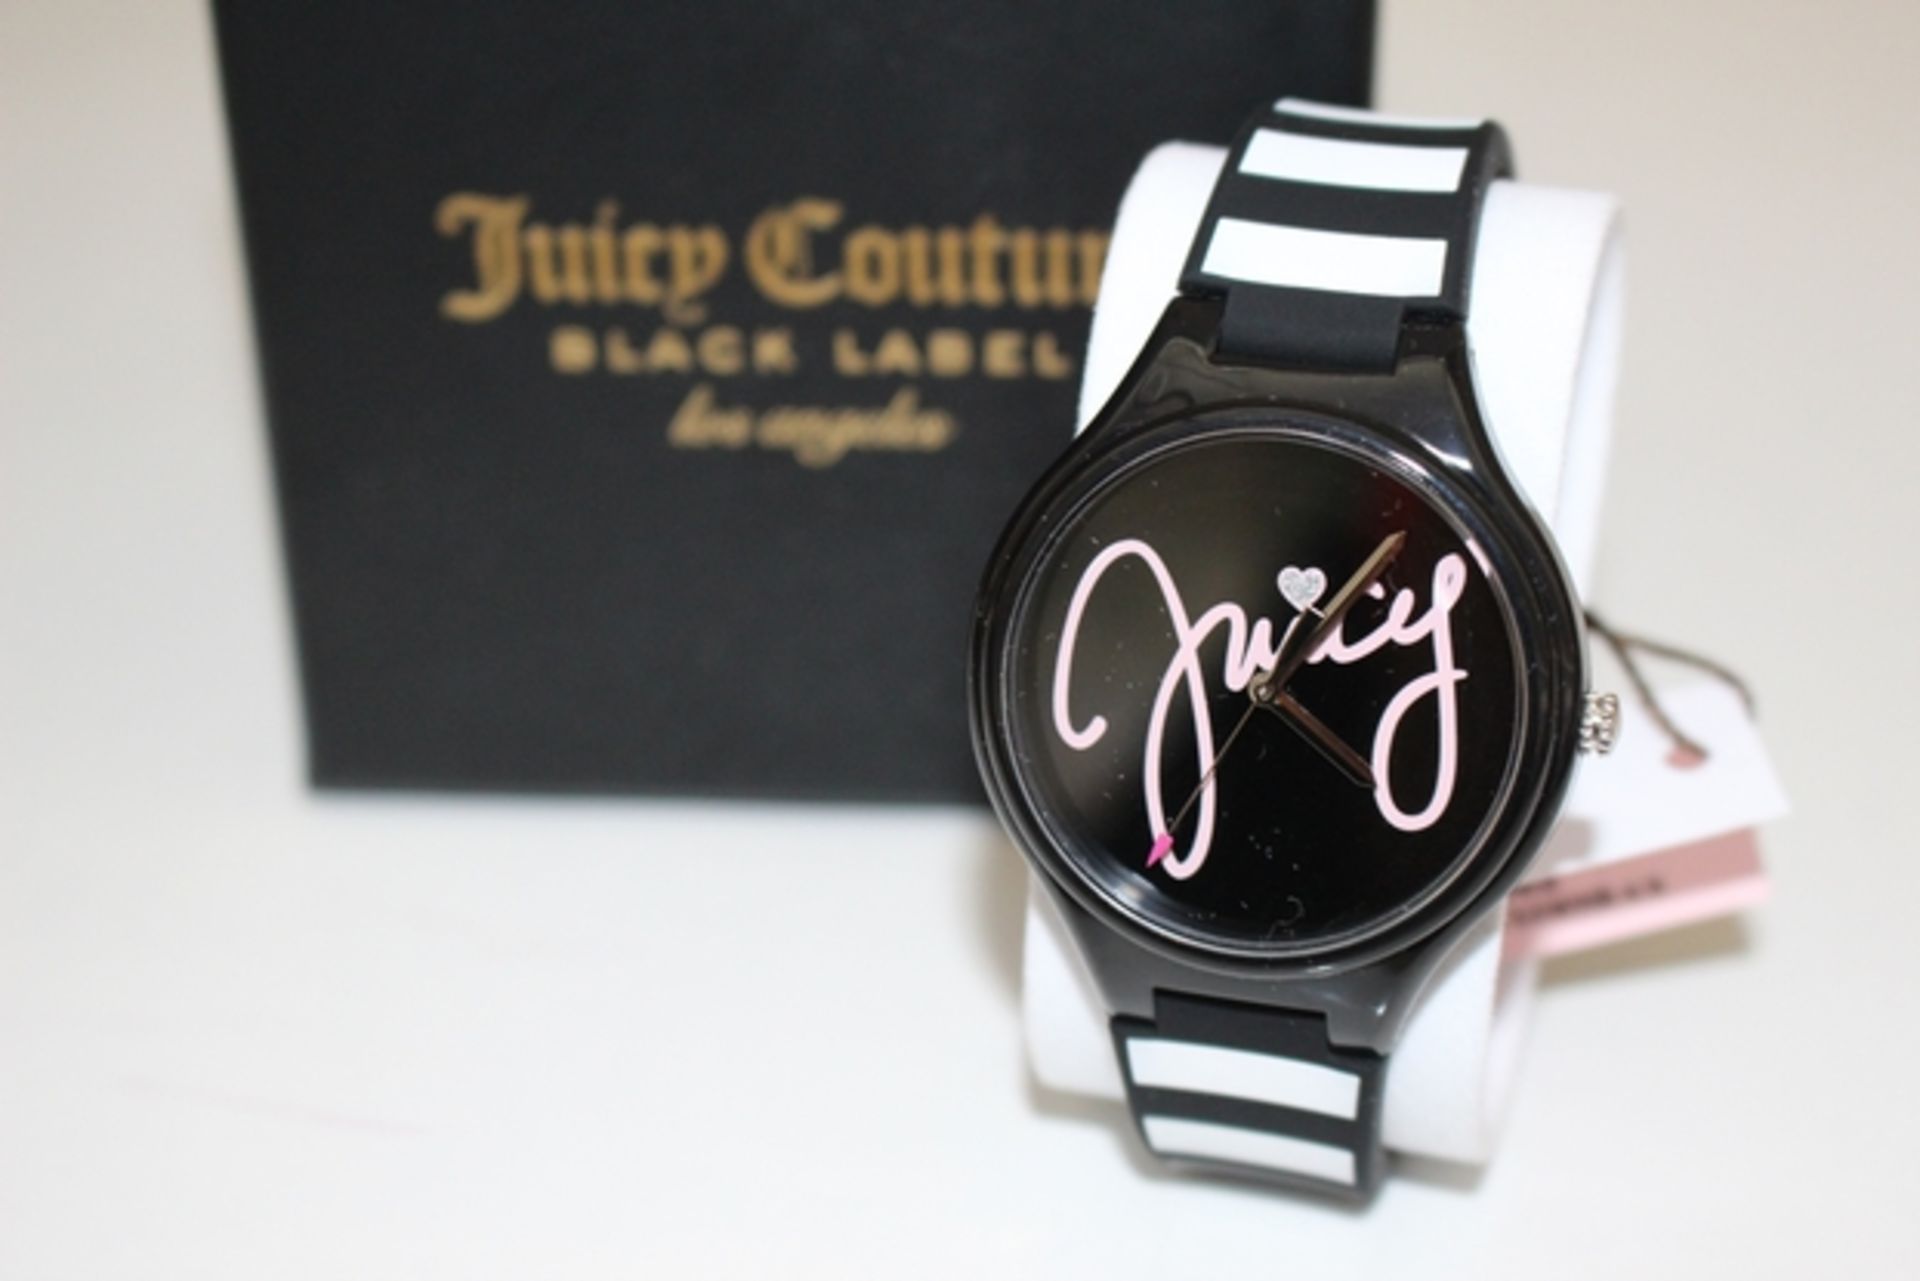 1X BOXED BRAND NEW JUICY COUTURE BLACK LABEL LOS ANGELES LADIES WRIST WATCH WITH 2 YEARS